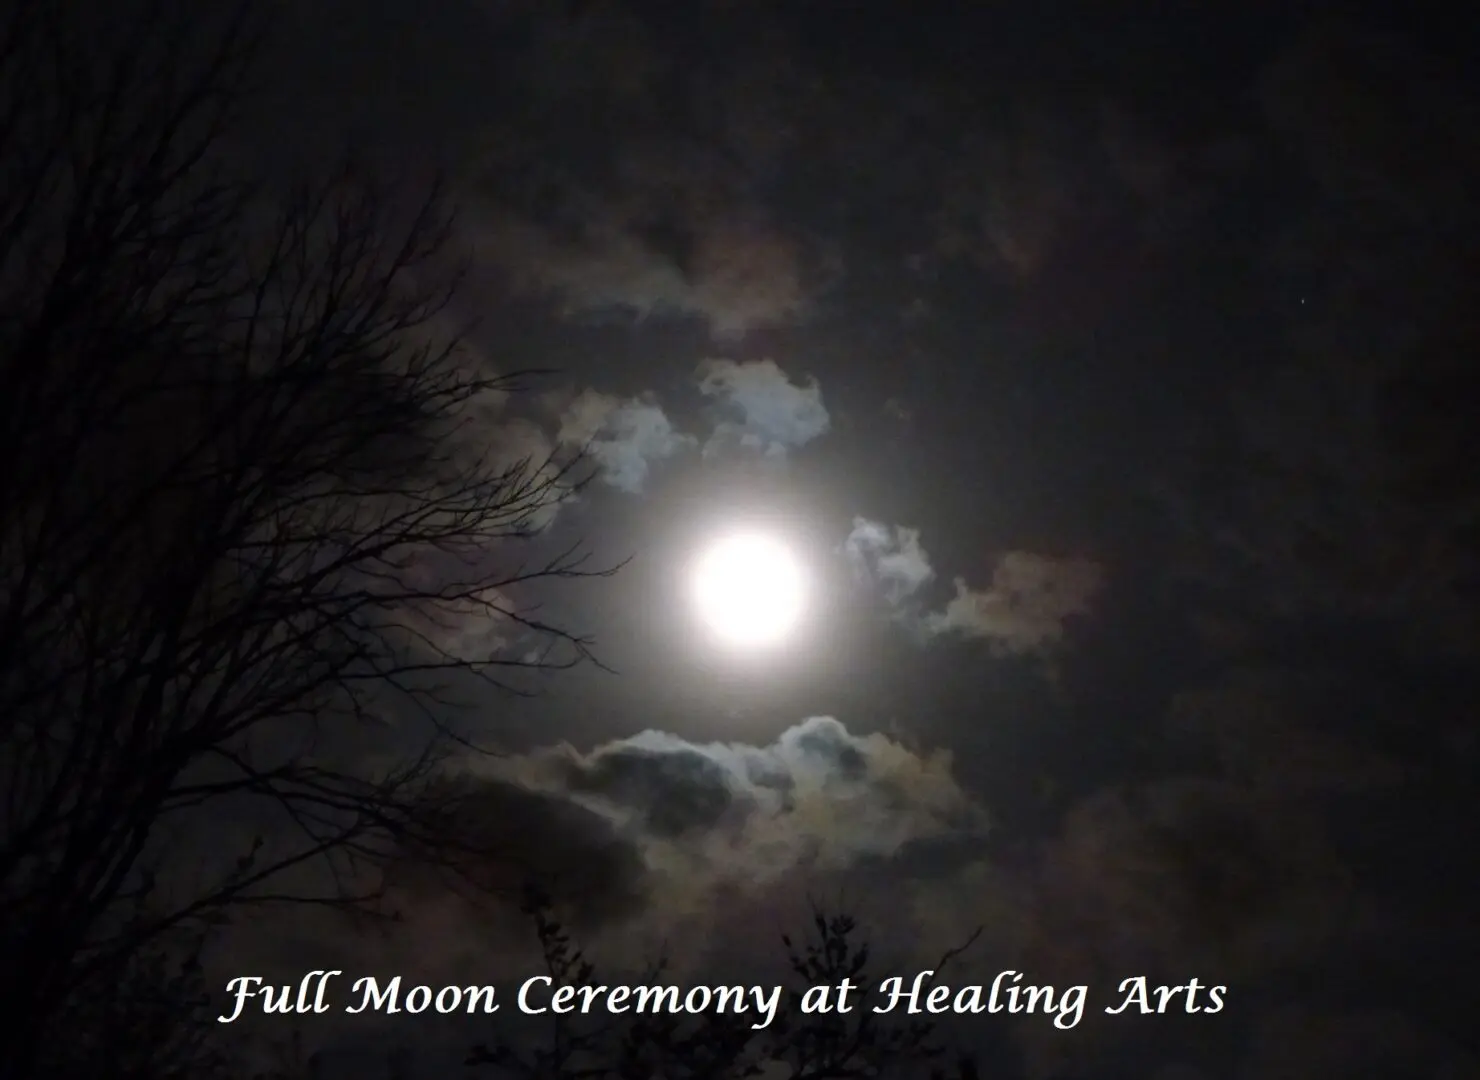 full moon ceremony at healing arts with the moon in the night